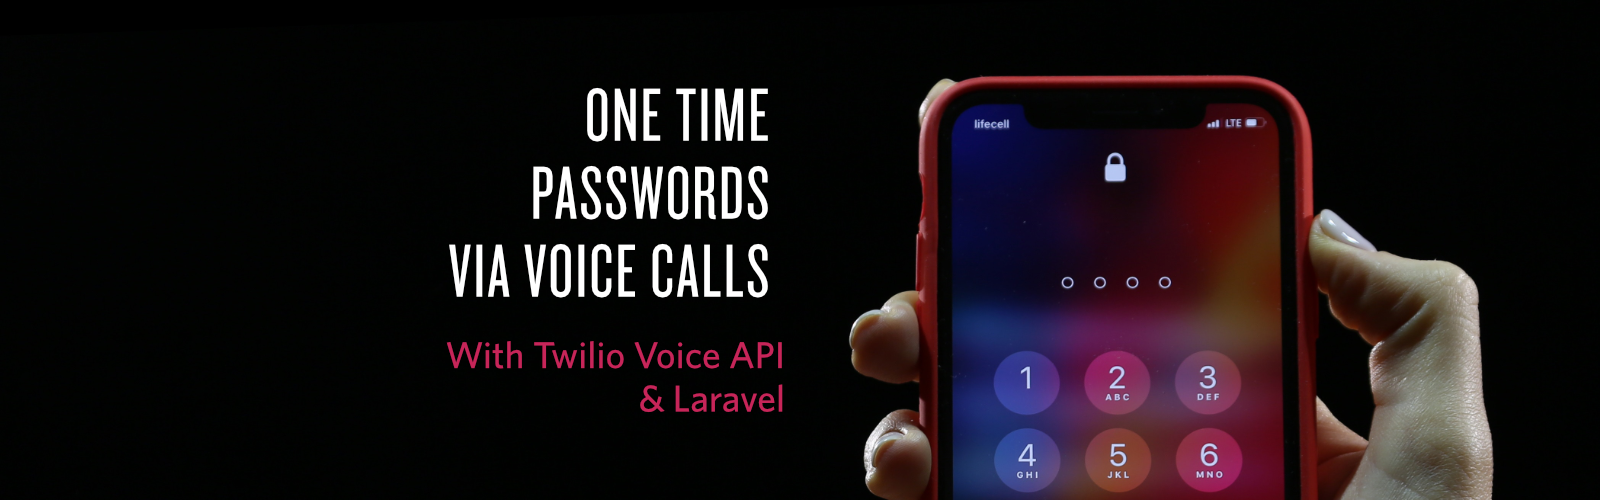 one-time-voice-calls-with-twilio-voice-cover-photo.png